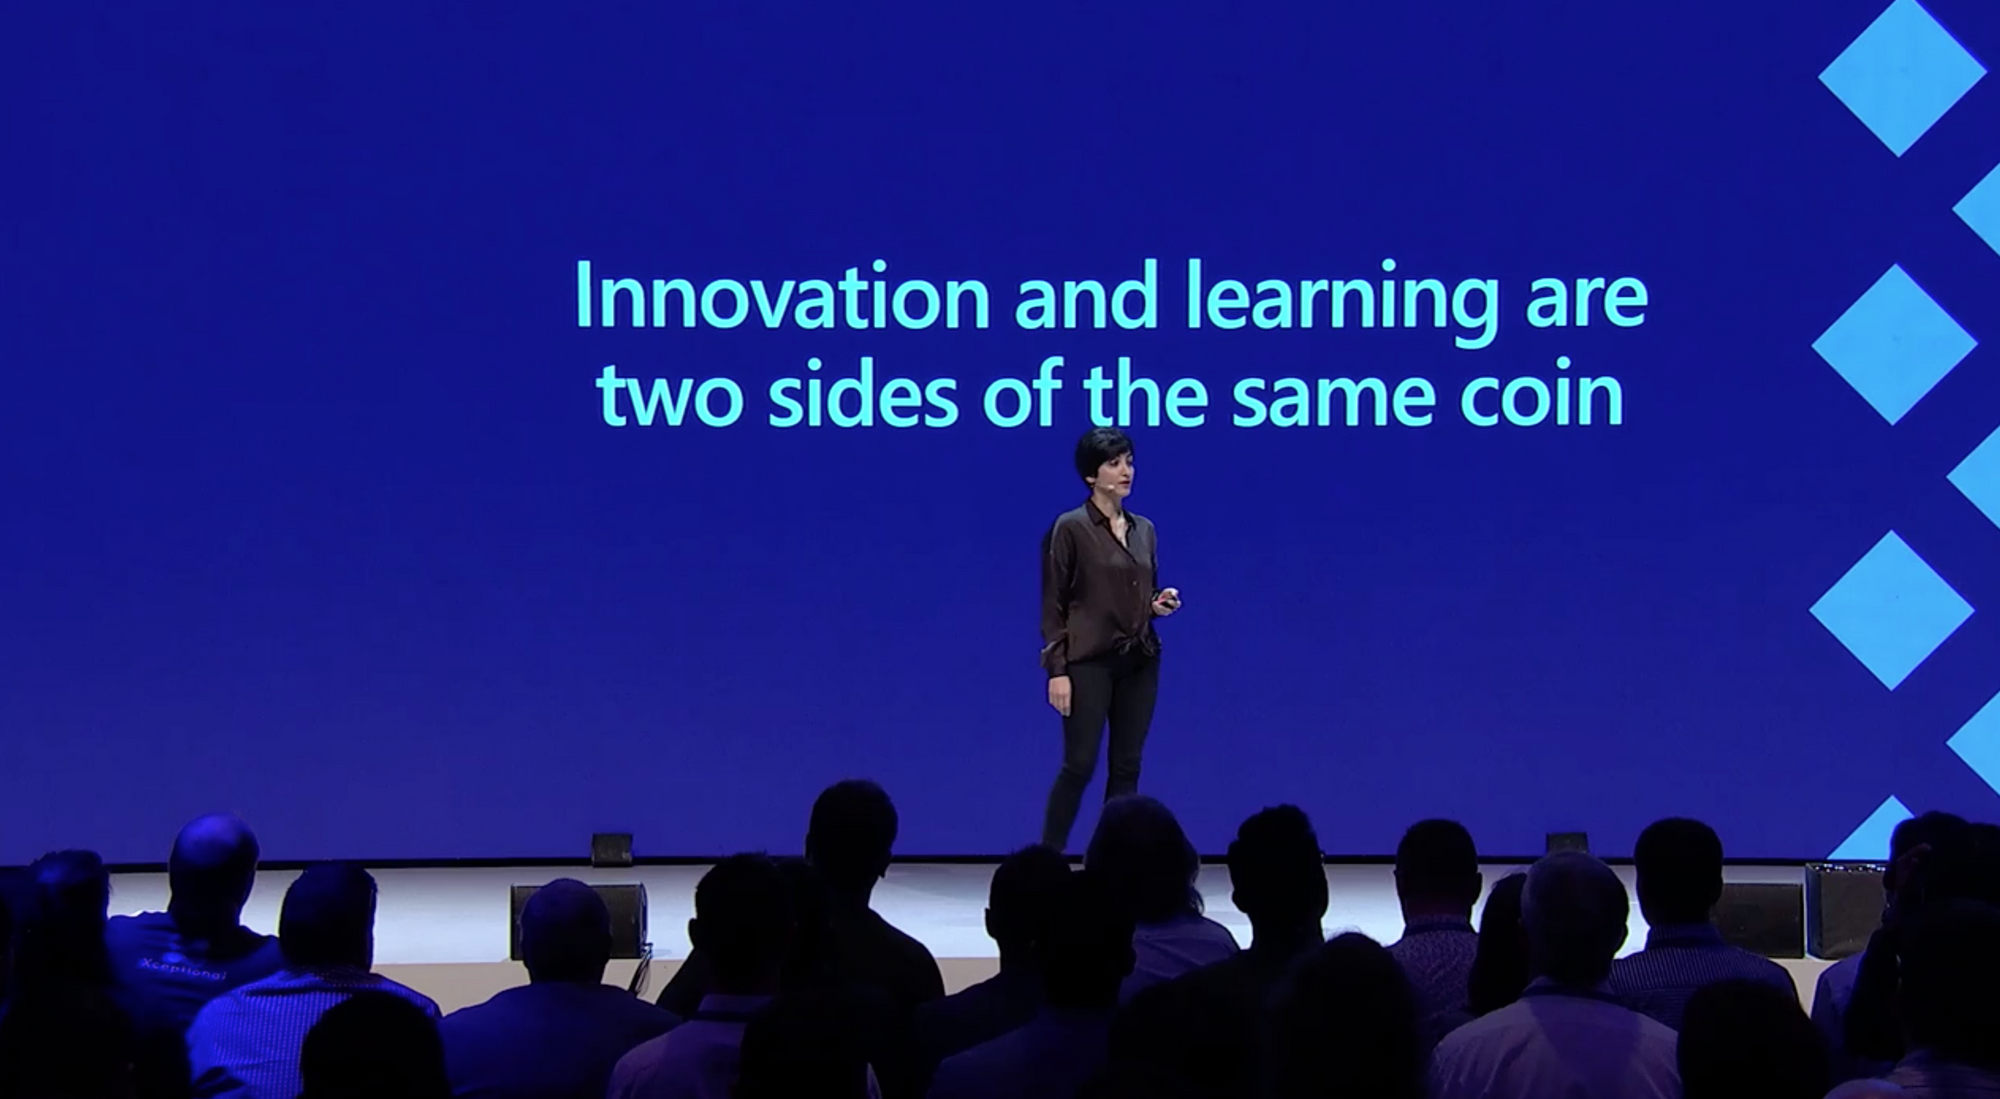 Innovation and learning are two sides of the same coin!